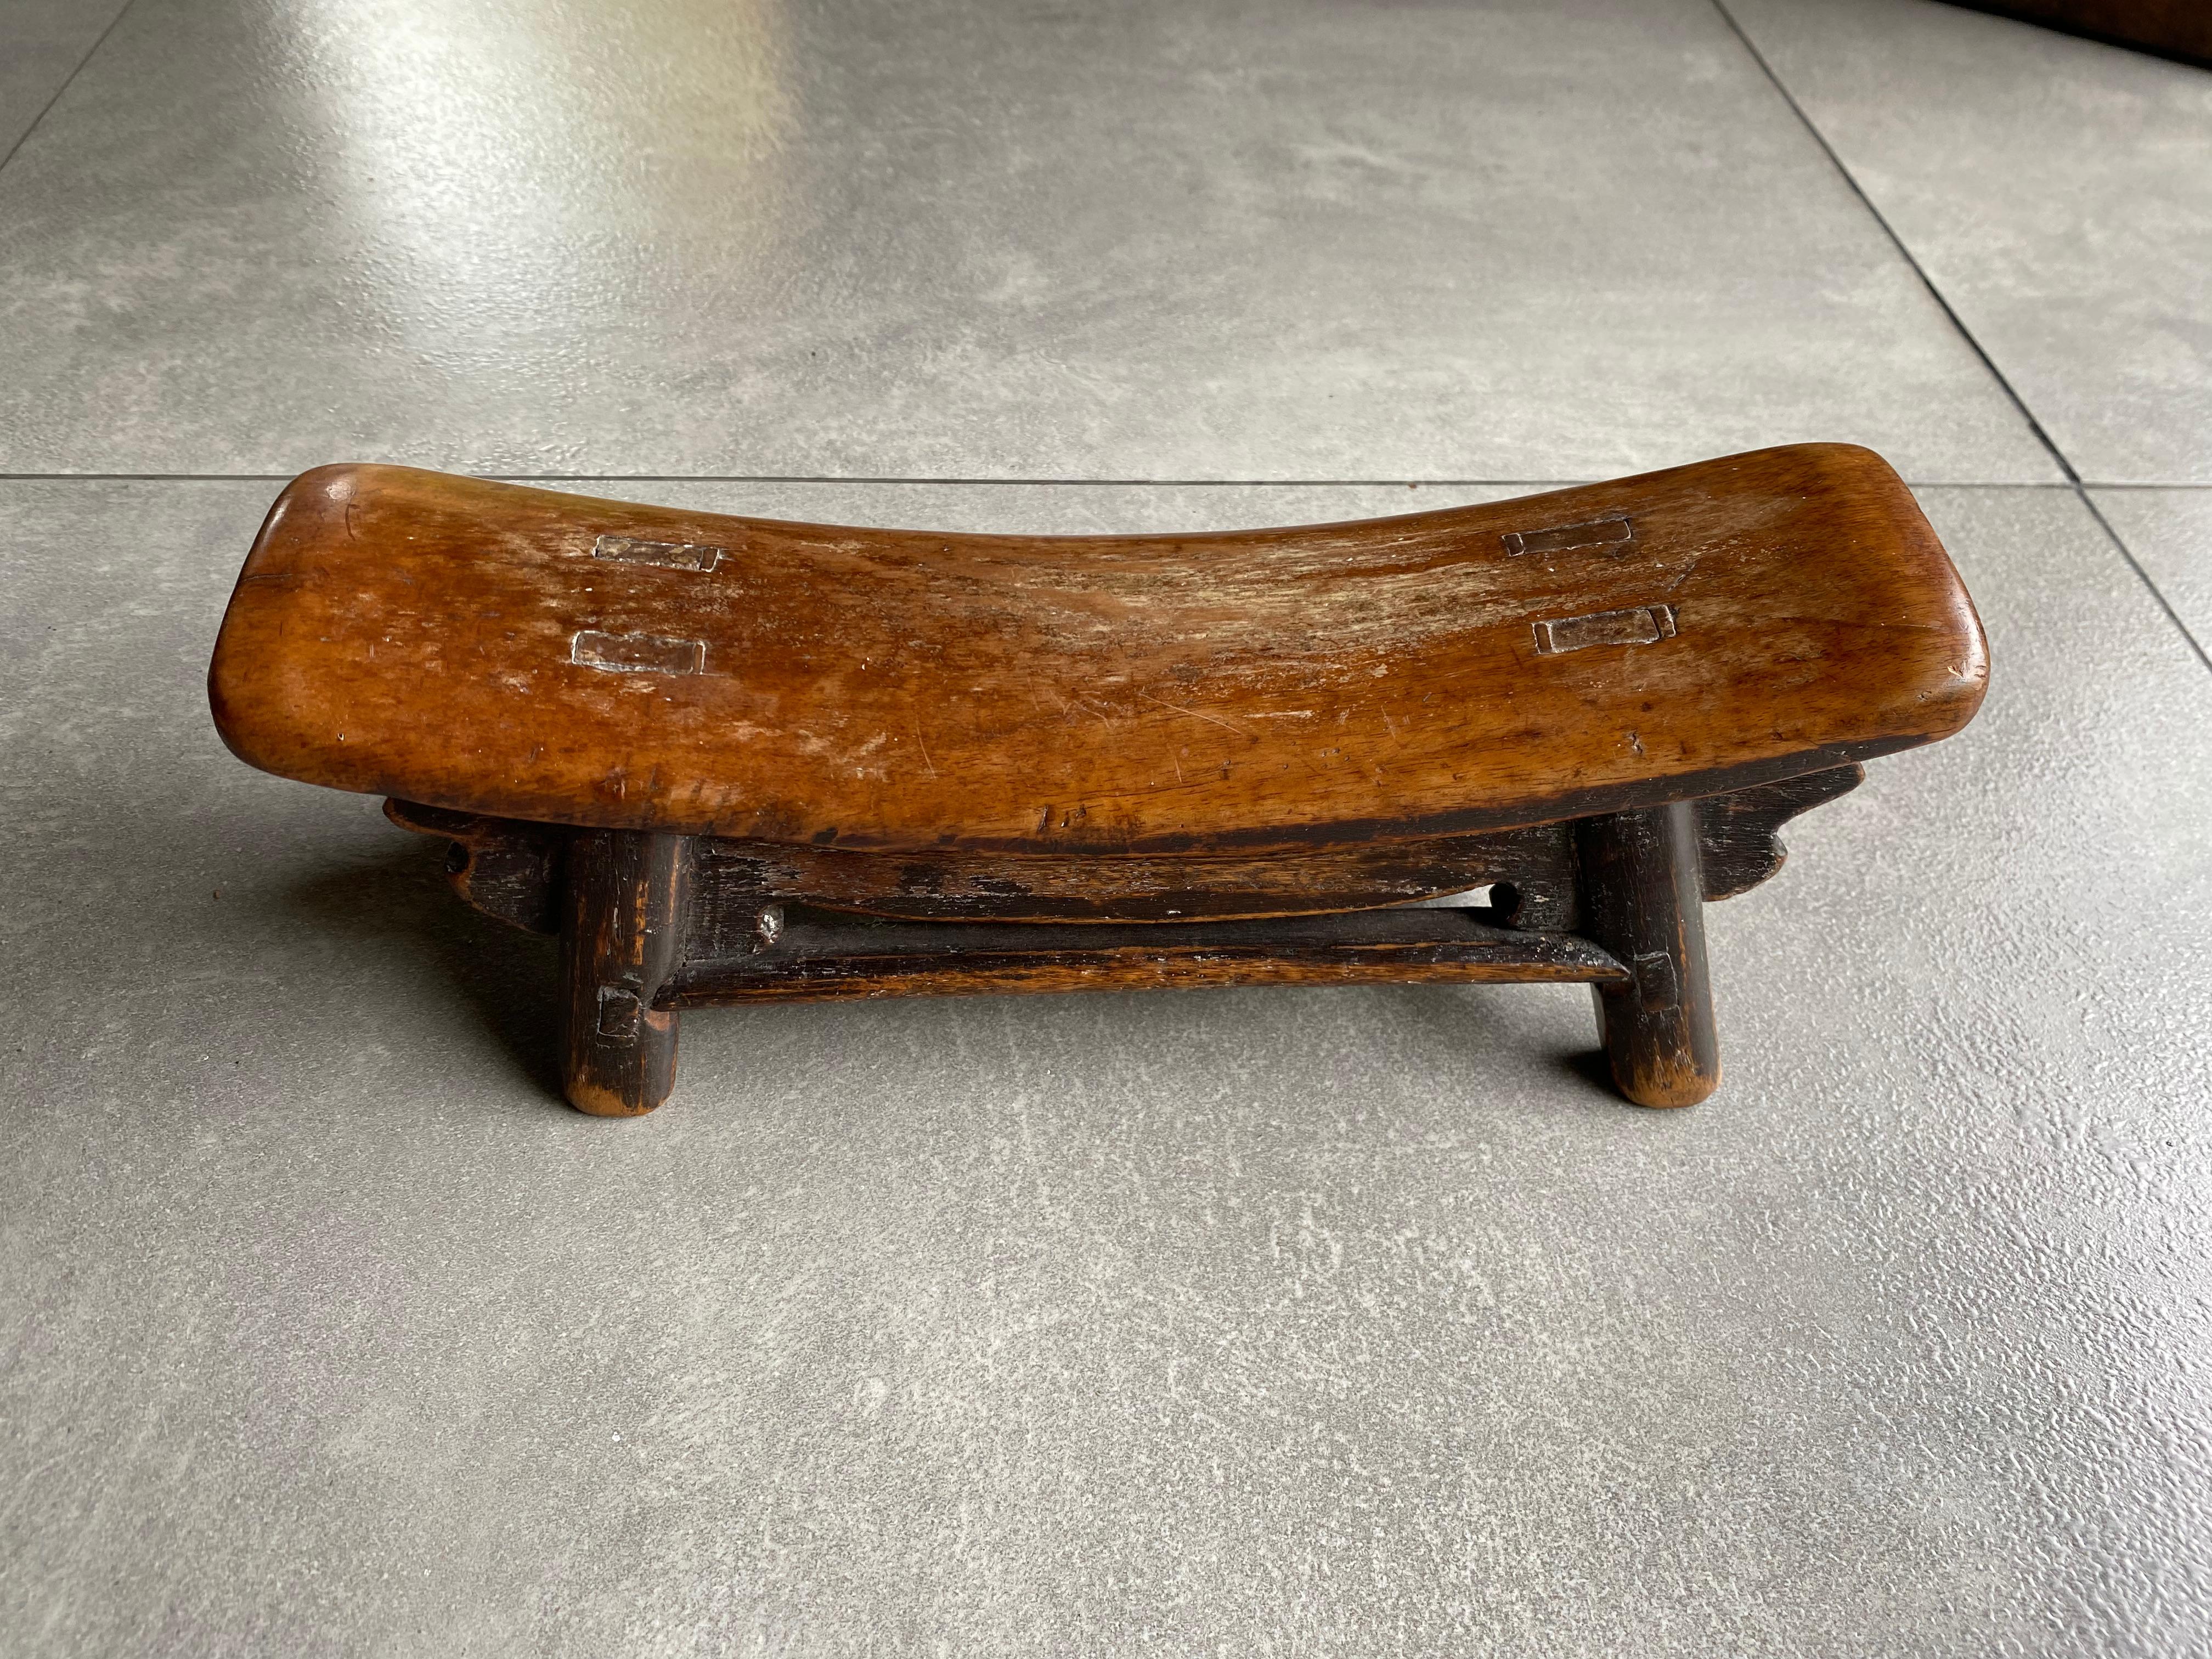 This Chinese headrest was once used in an opium smoke house for a smoker to rest while intoxicated. It is hand-carved from wood with an elegantly curved shape. This piece has a lovely wood texture and was crafted using only wooden